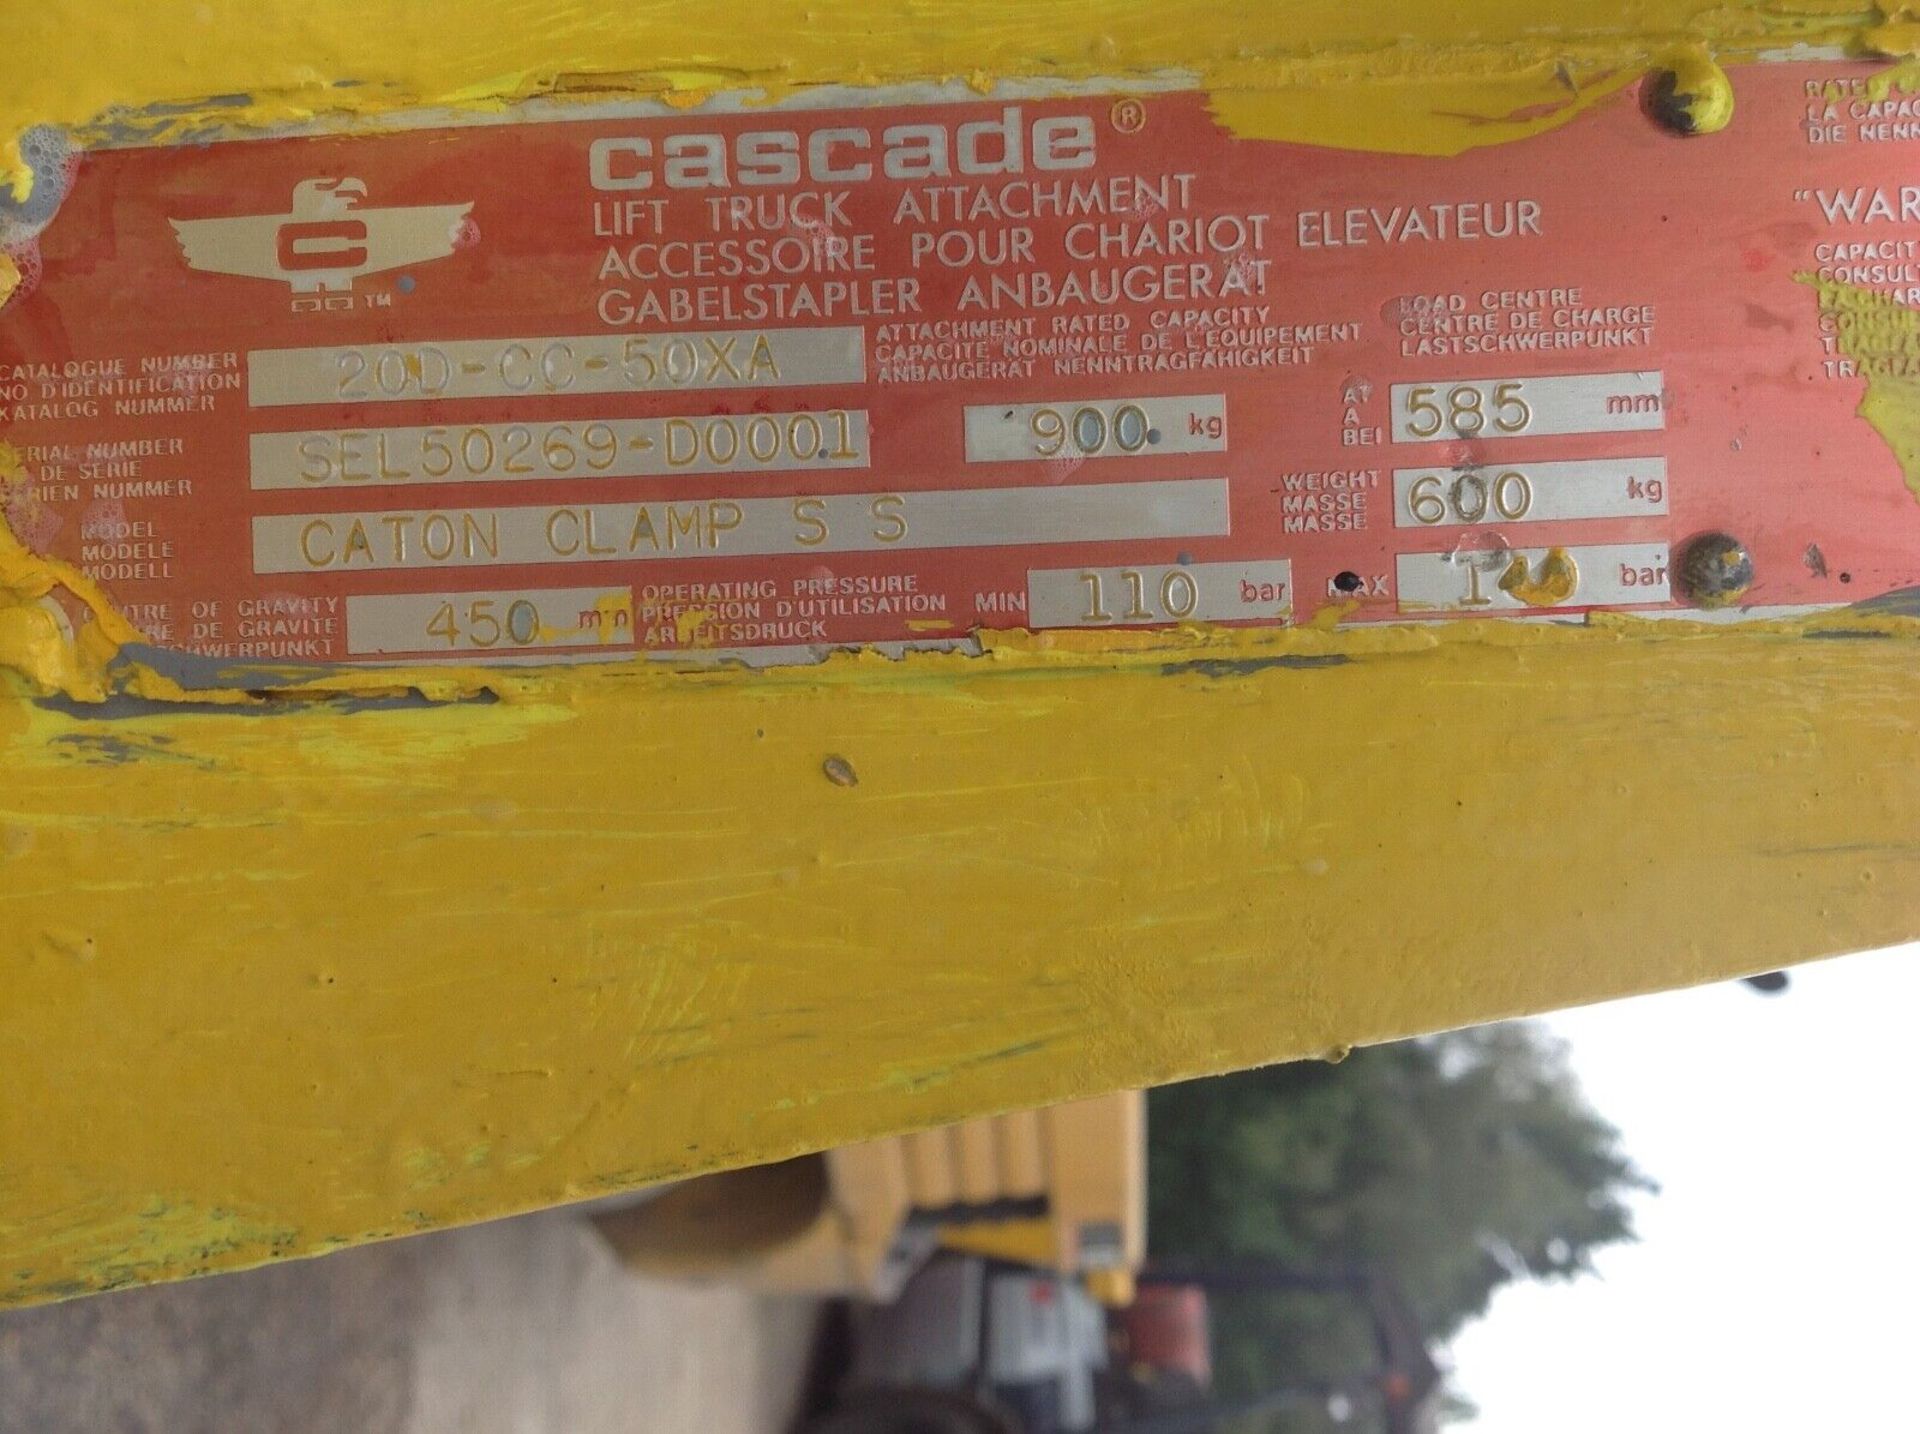 Cascade forklift bale grab attachment - Image 5 of 5